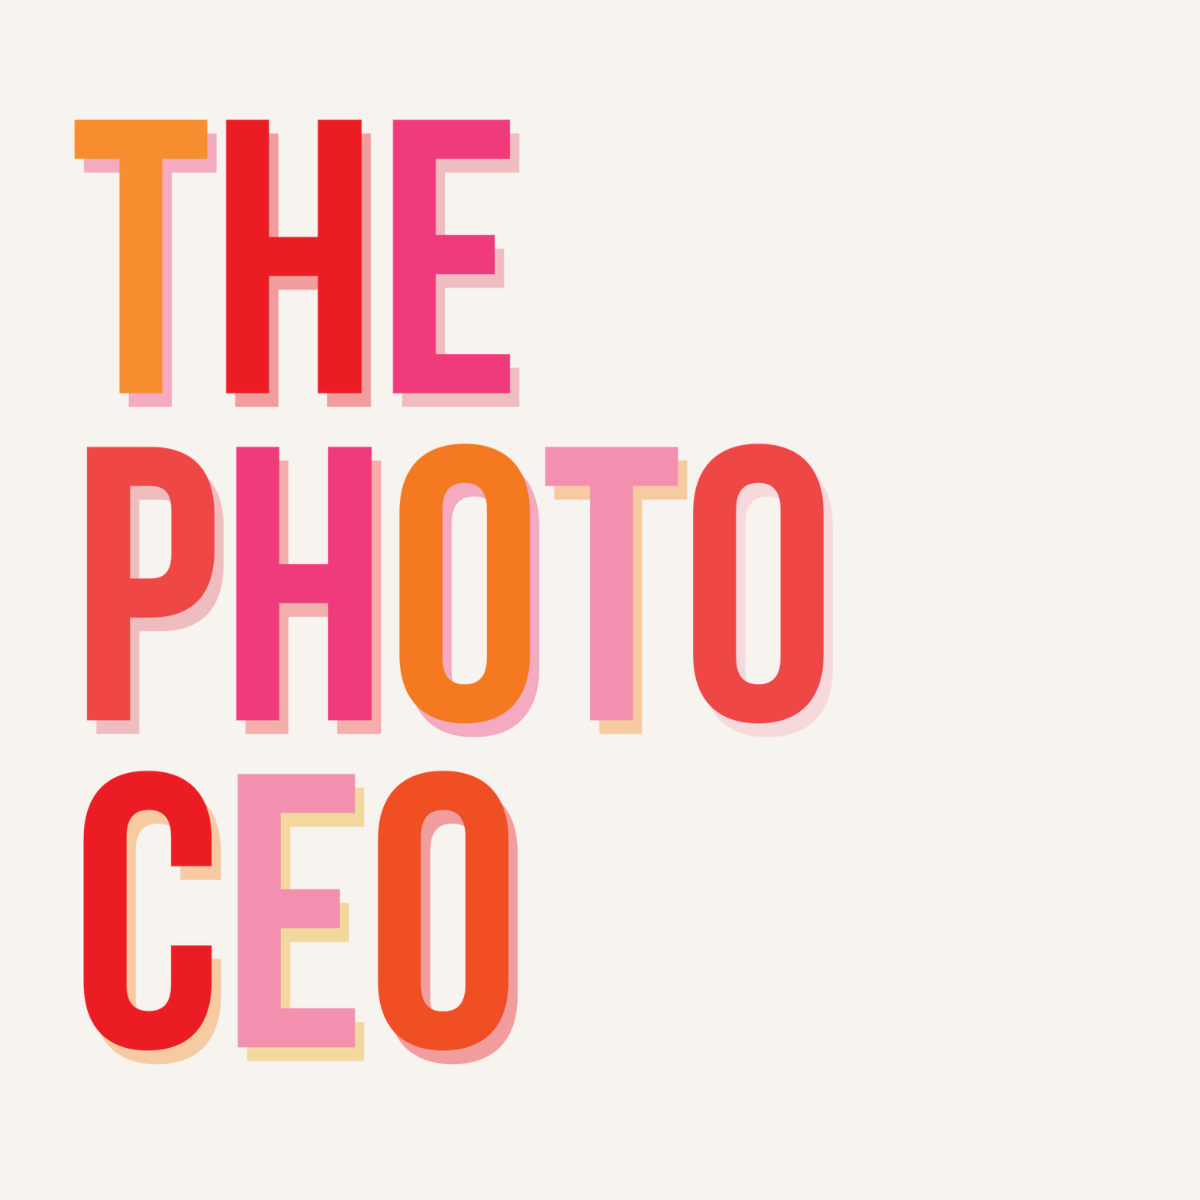 Artwork for The Photo CEO by Tamera Darden